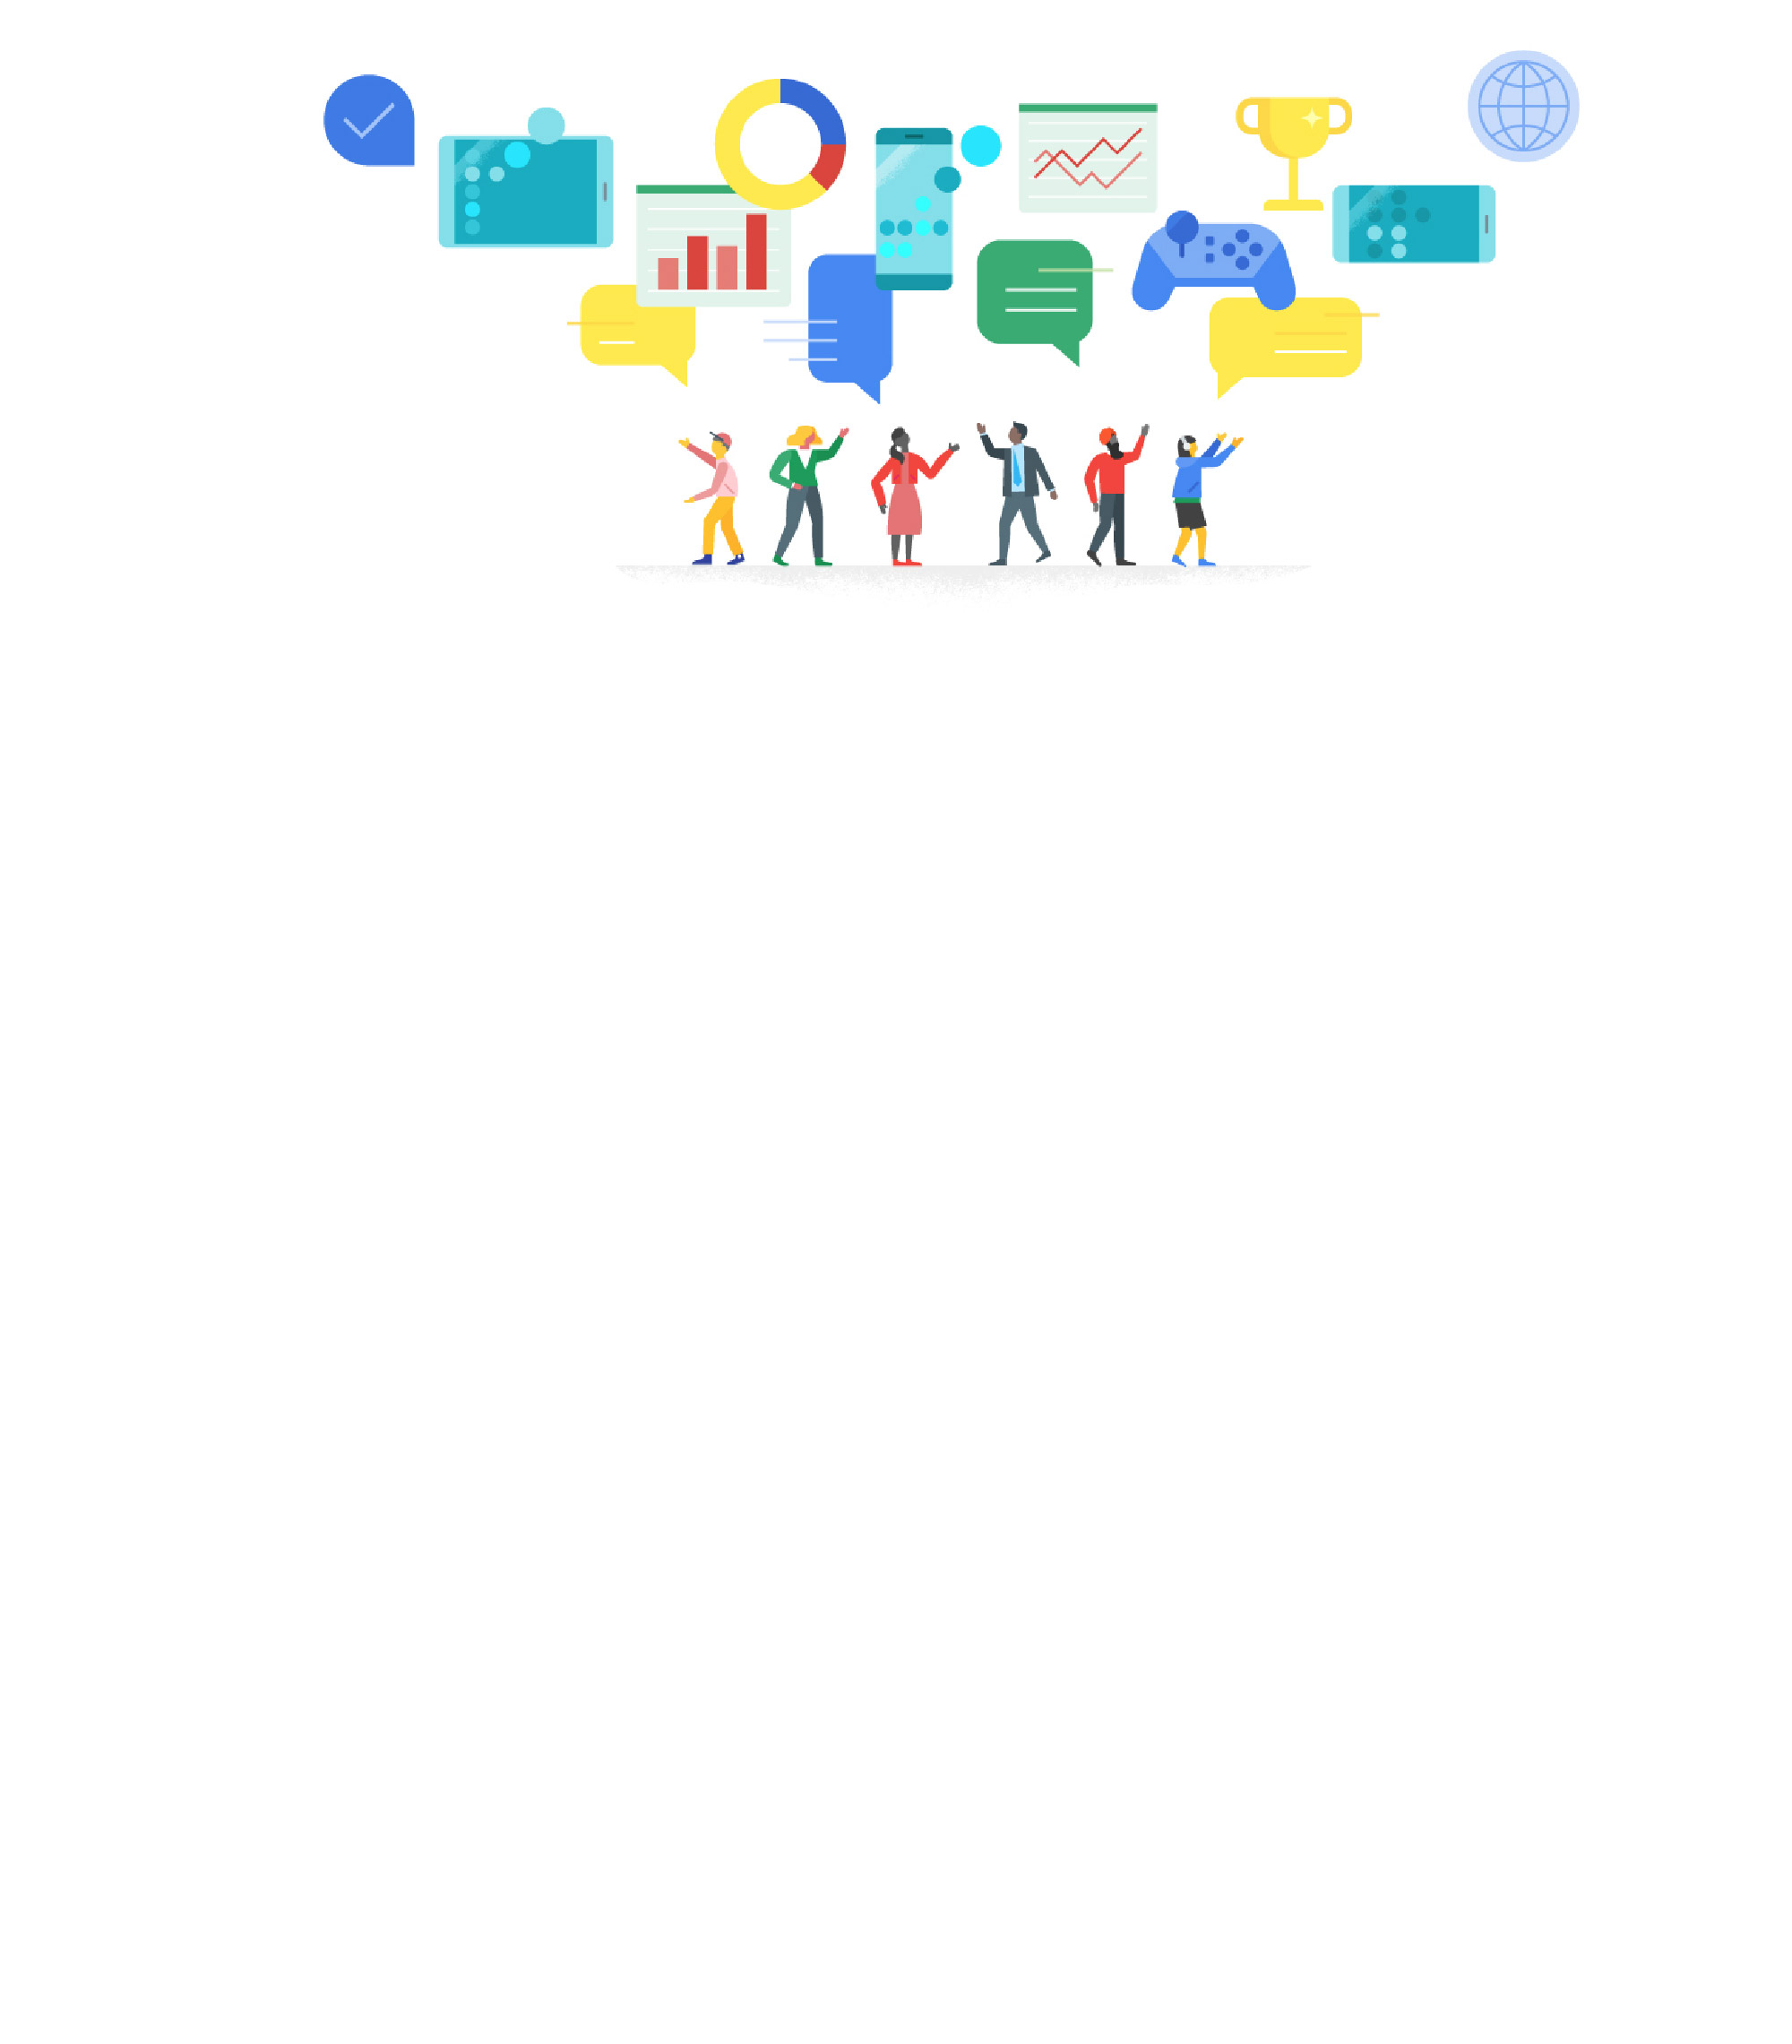 Google graphic illustration of a group of people and various icons representing work-related functions